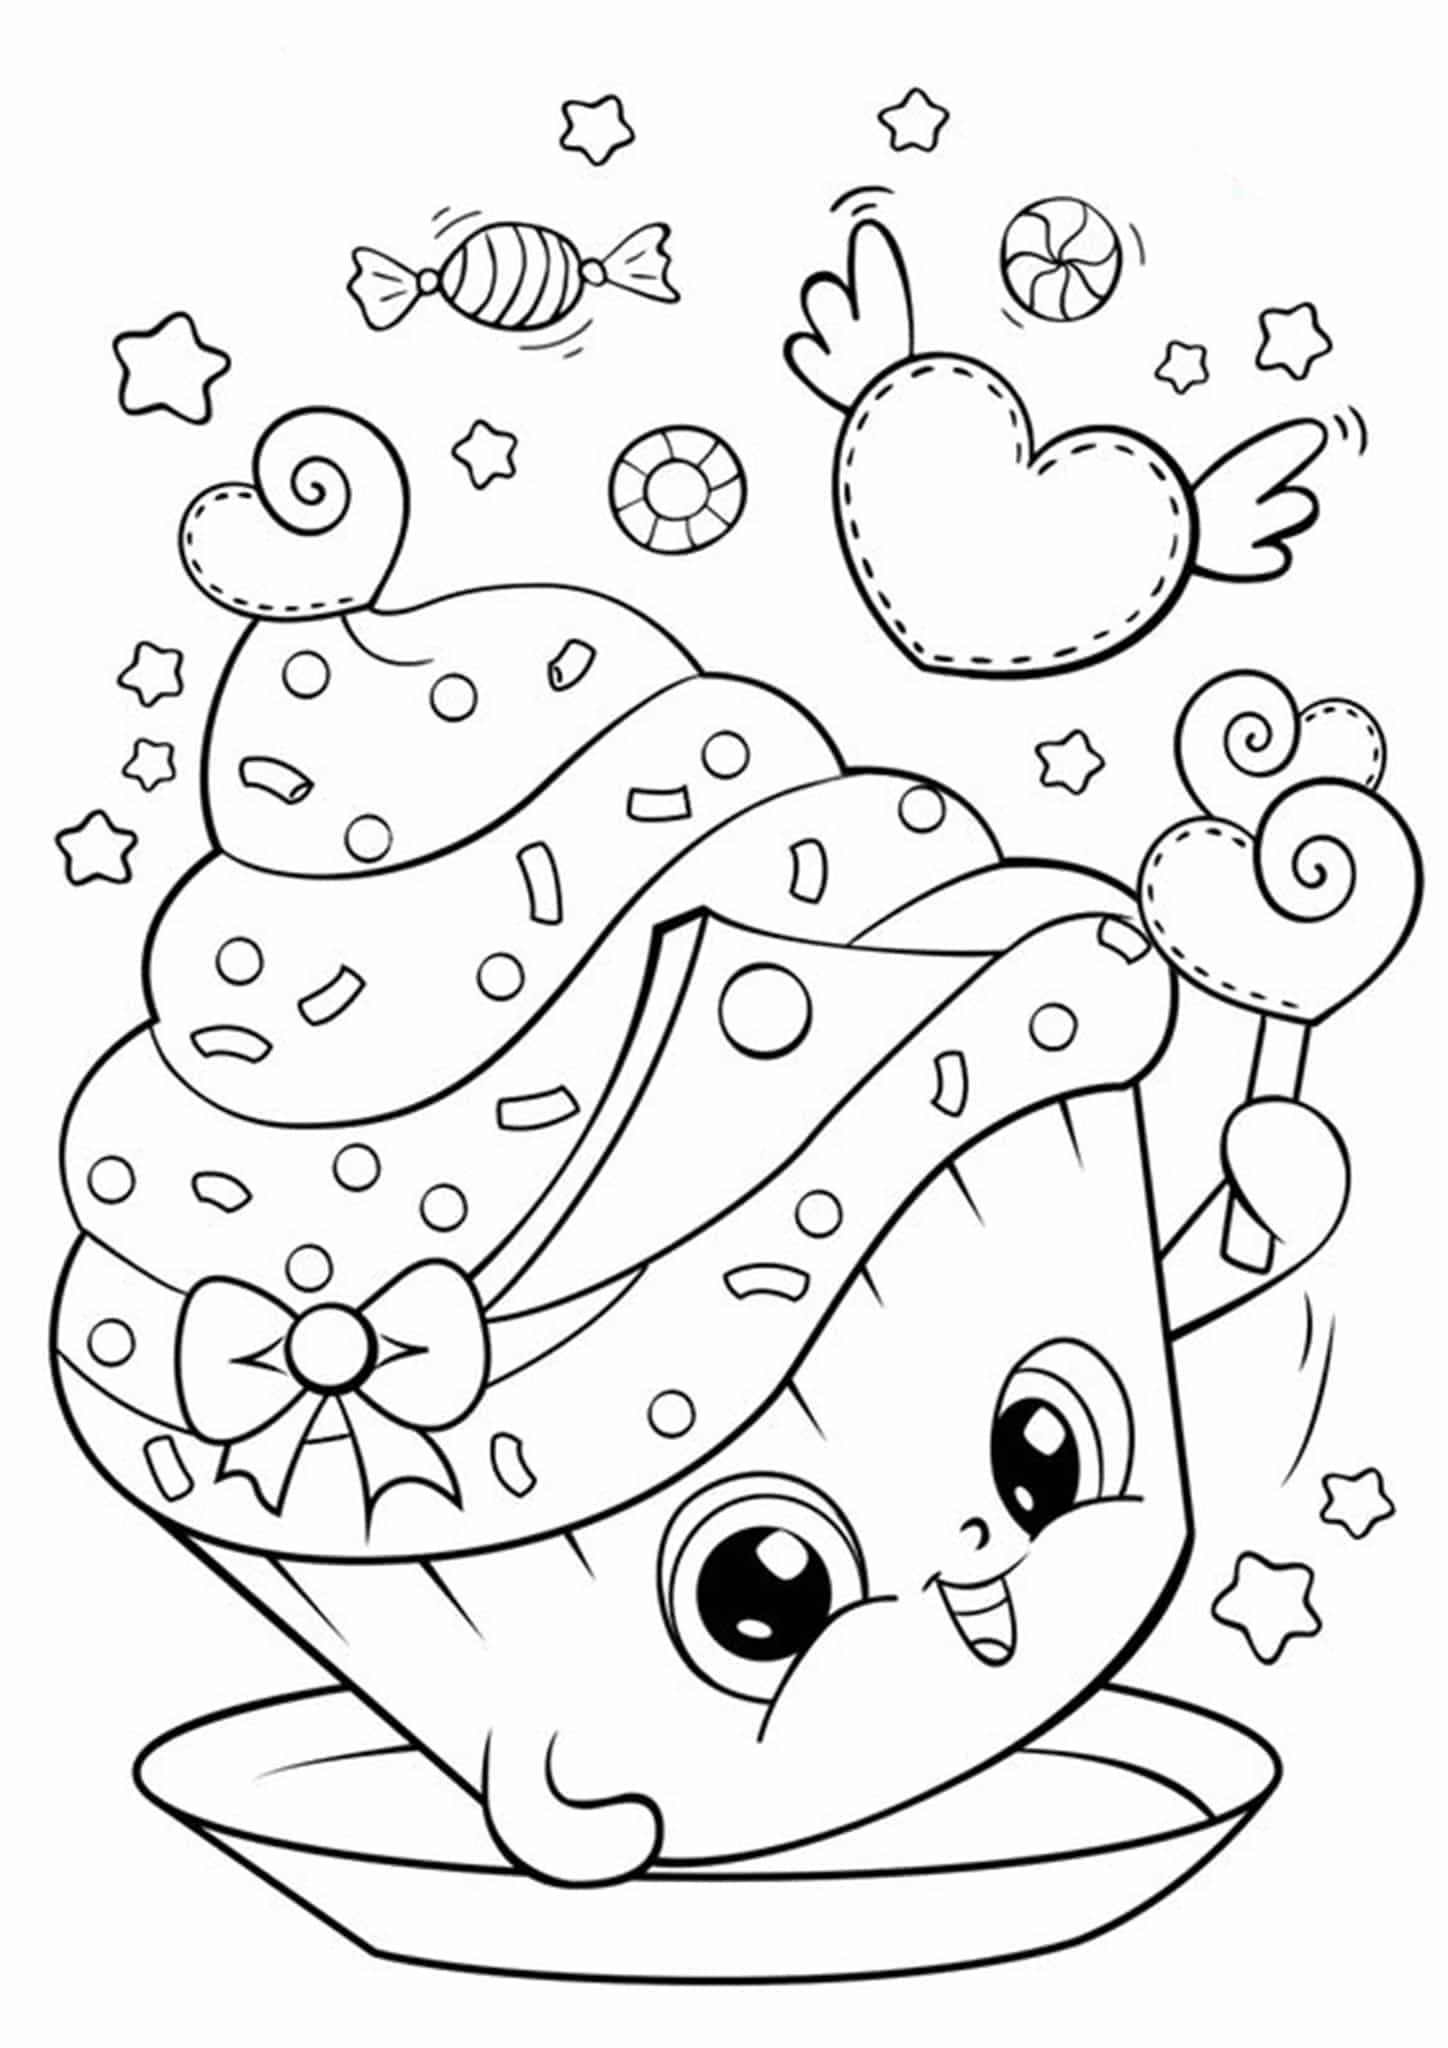 Easy Online Coloring Simple coloring pages to download and print for